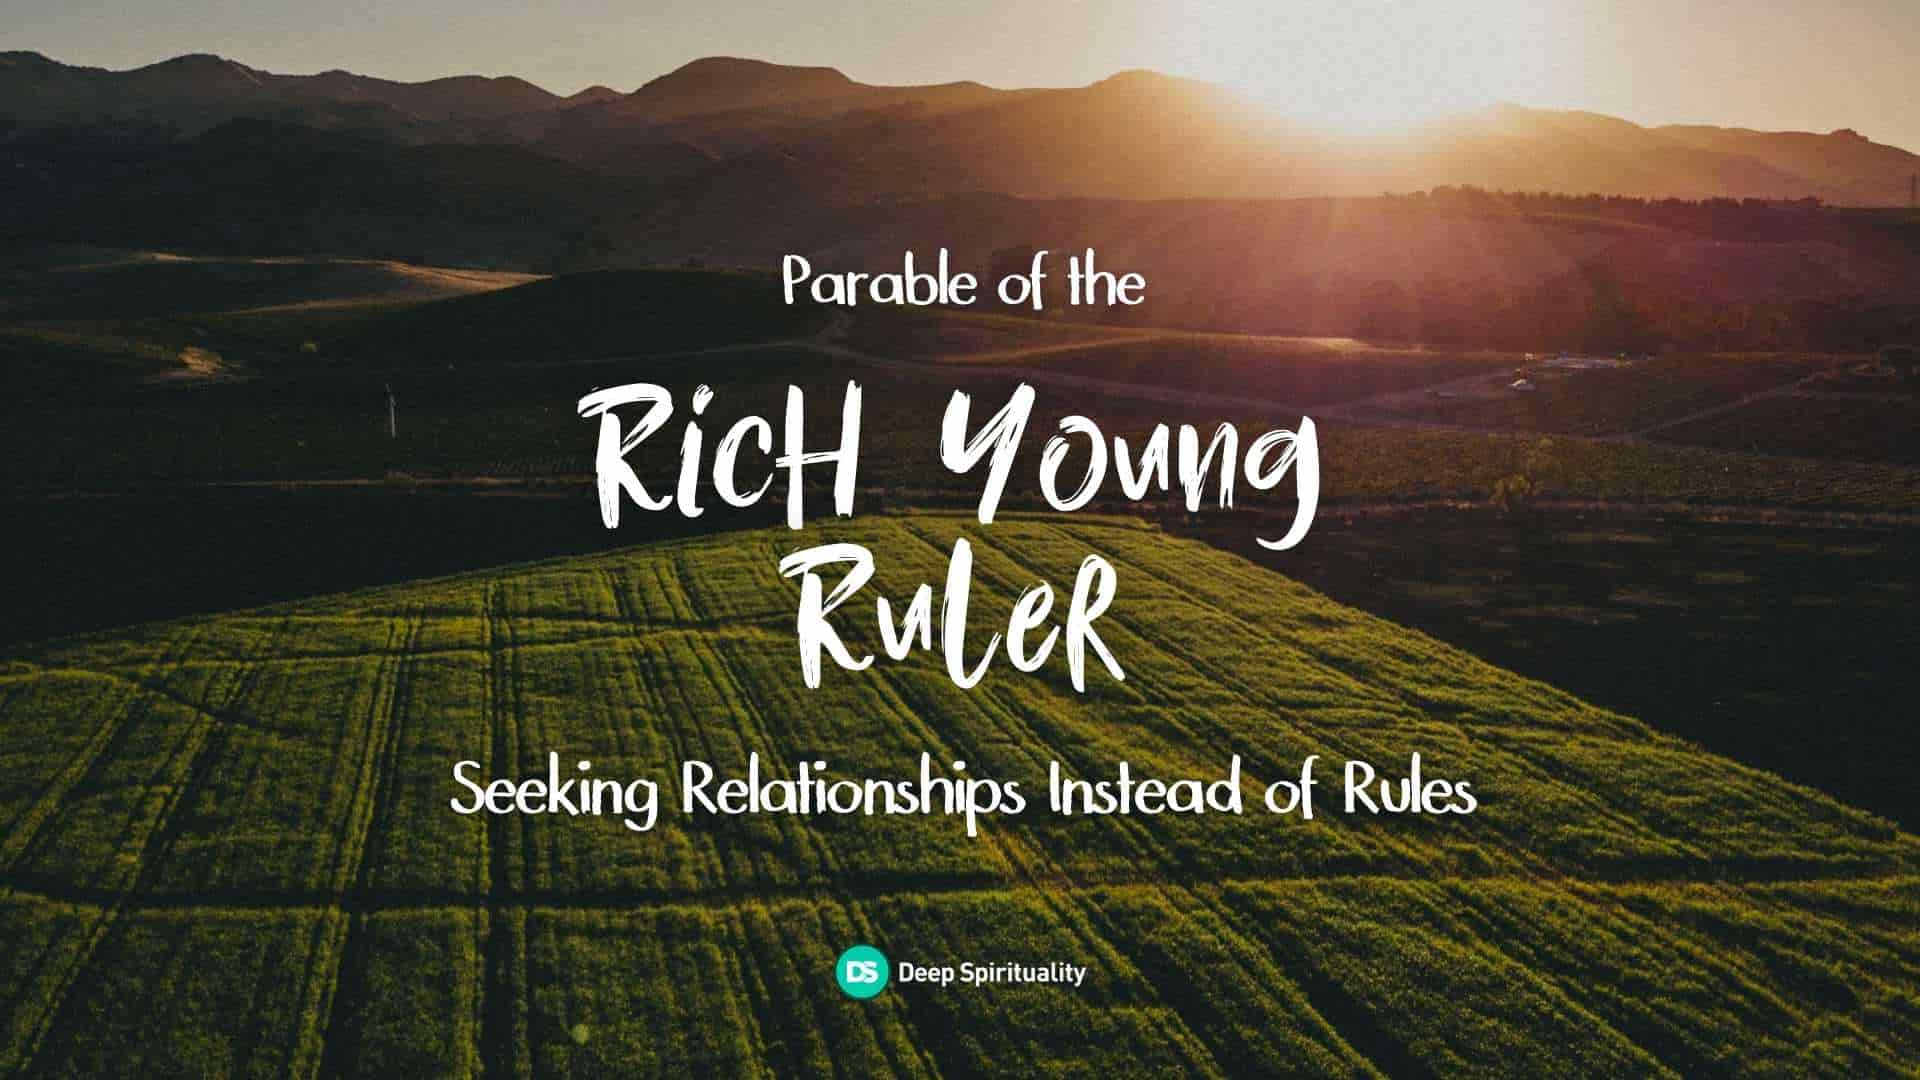 The Rich Young Ruler: How to Stop Seeing Rules and Start Seeing Relationship 7